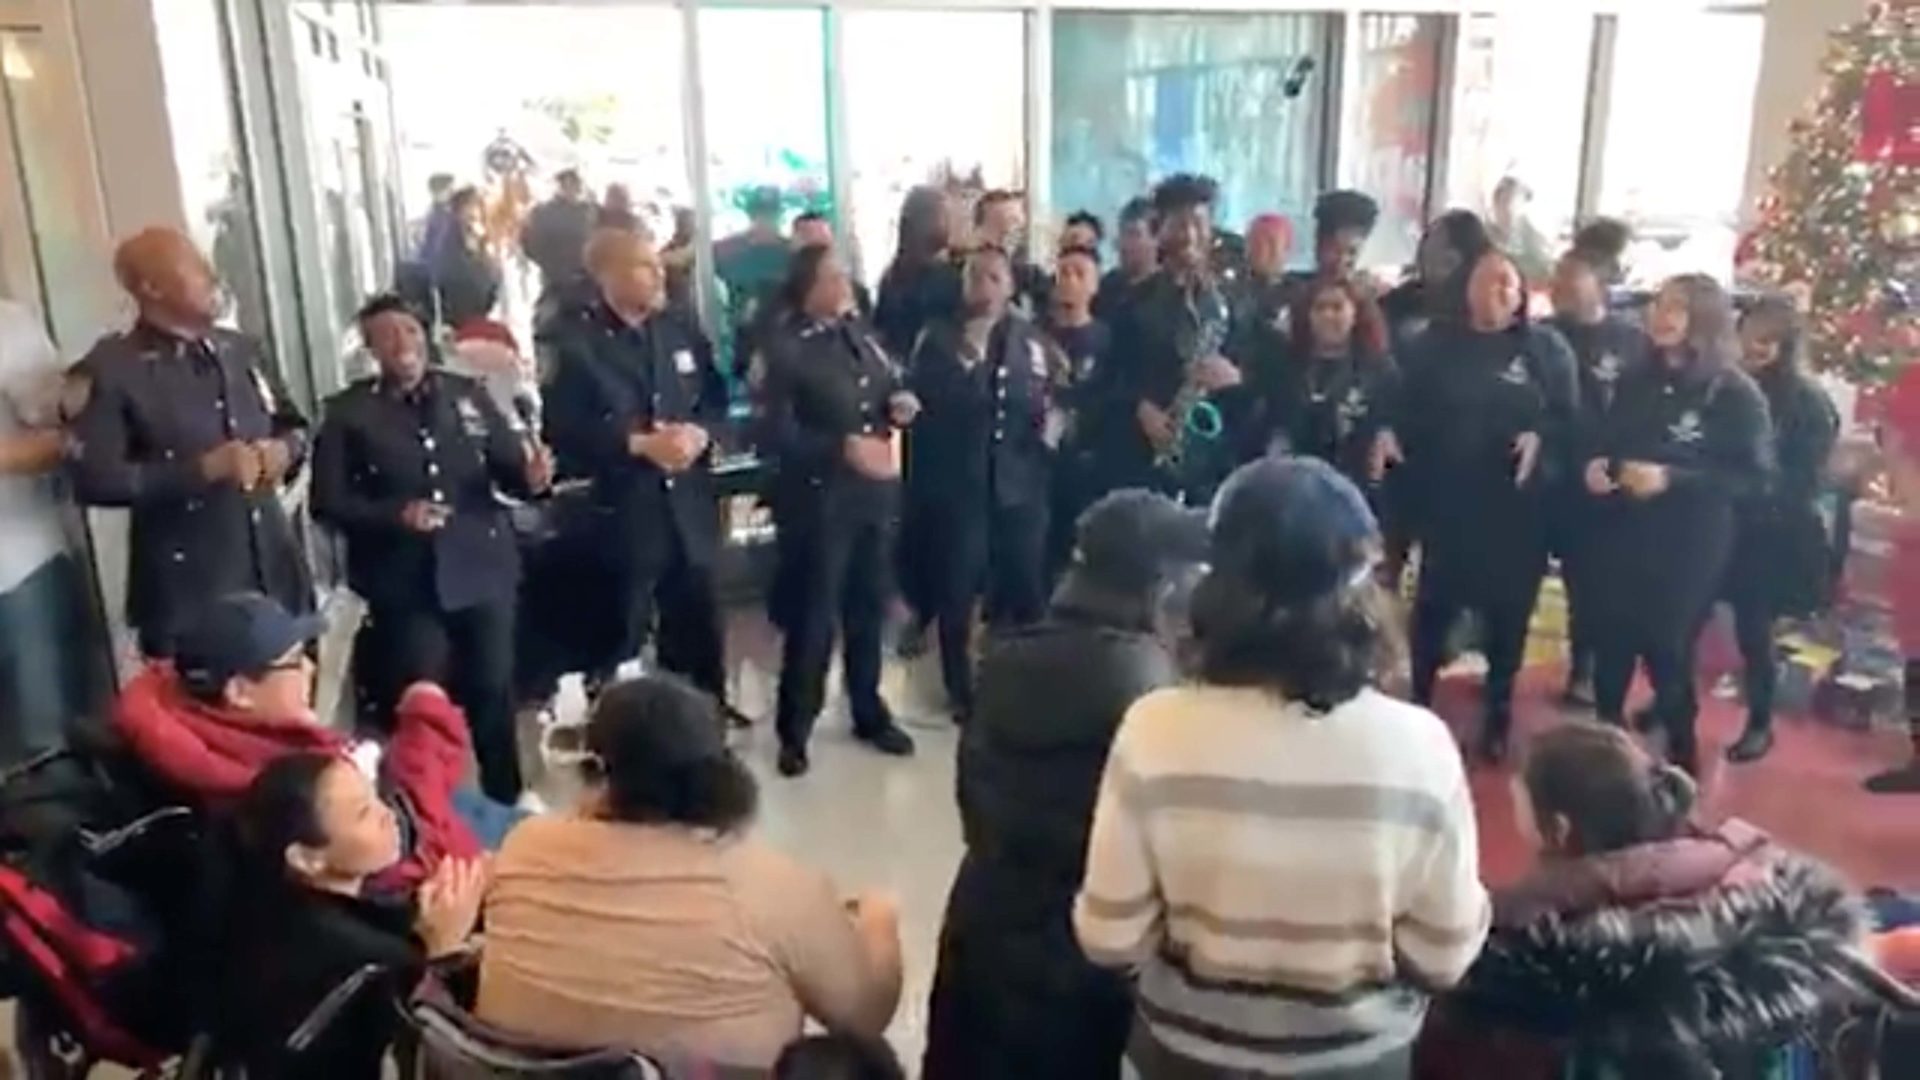 LIVE from St Mary’s Children’s Hospital, The NYPD’s Holiday Celebration